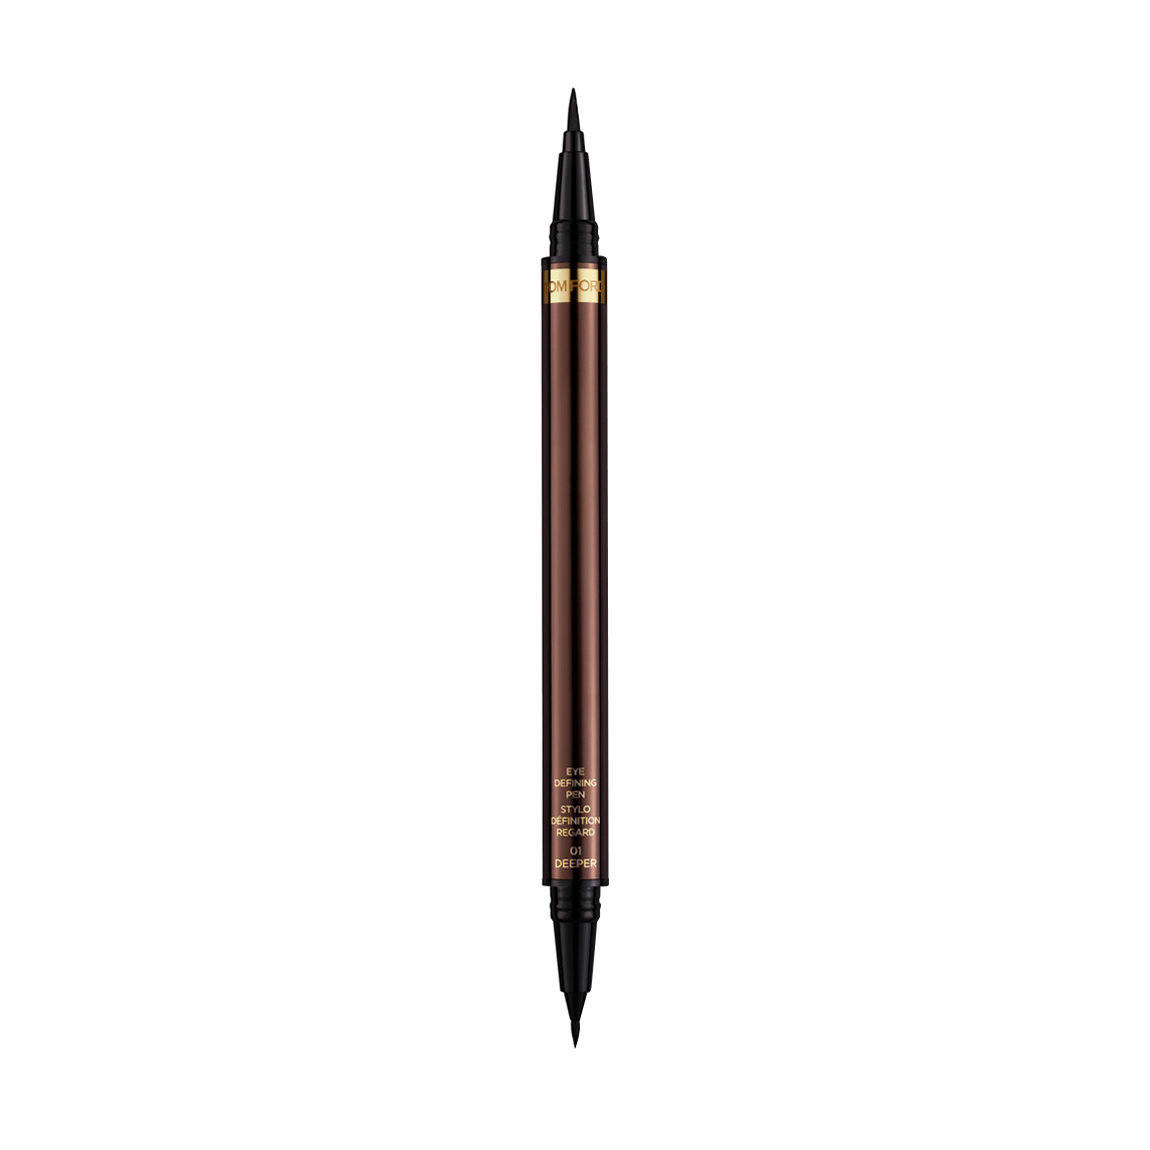 TOM FORD Eye Defining Pen alternative view 1 - product swatch.